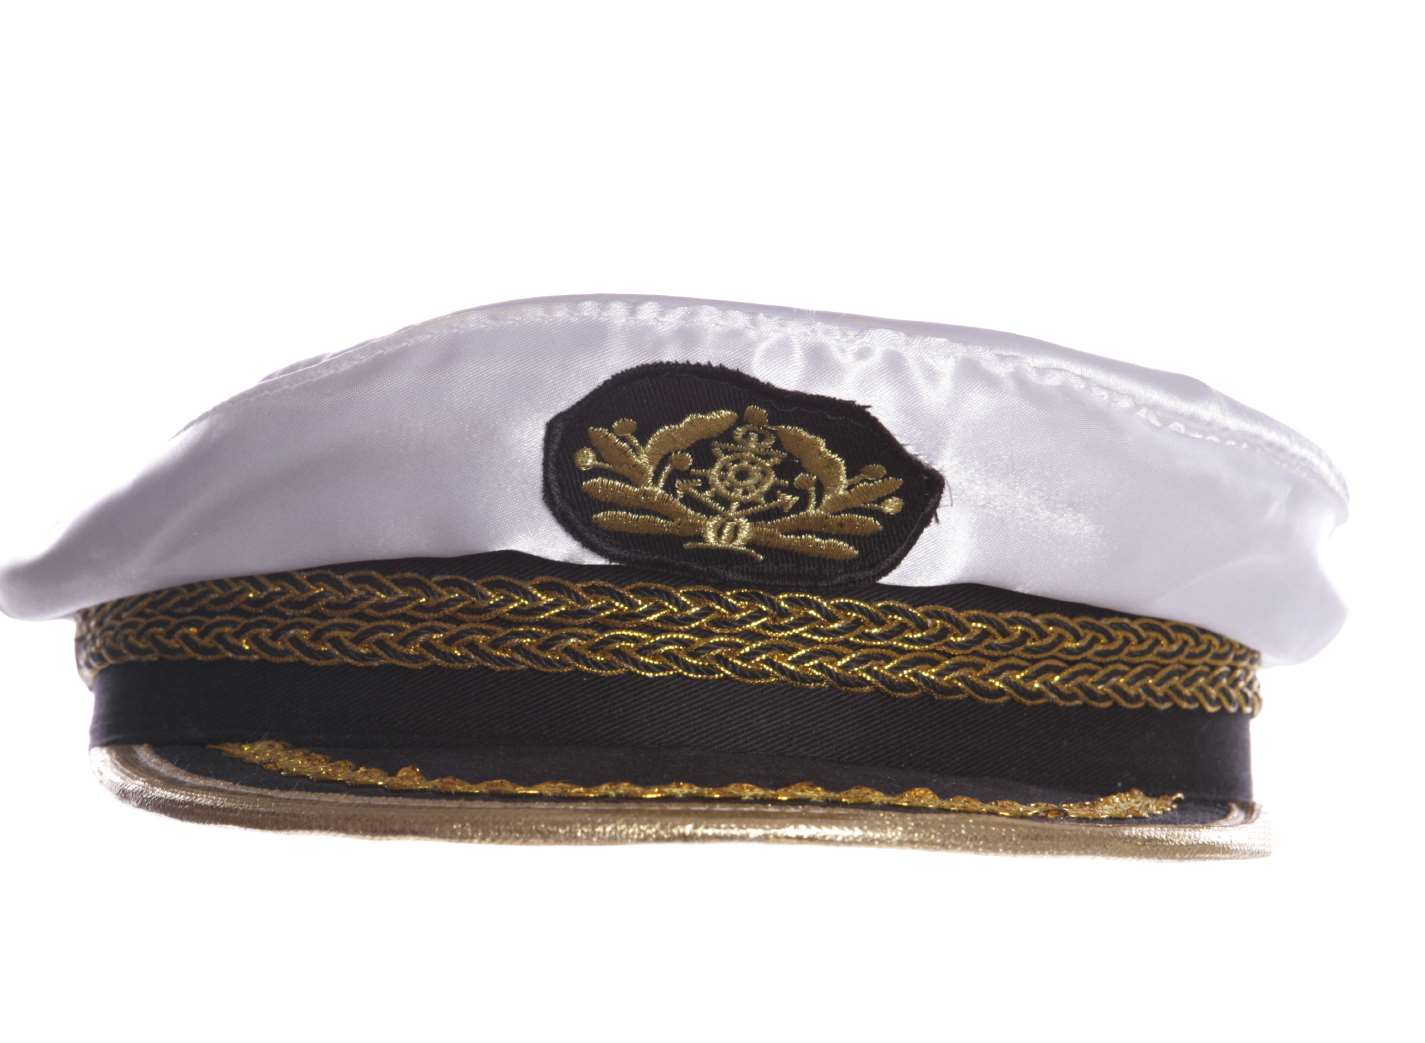 A sailor's hat. Stock image